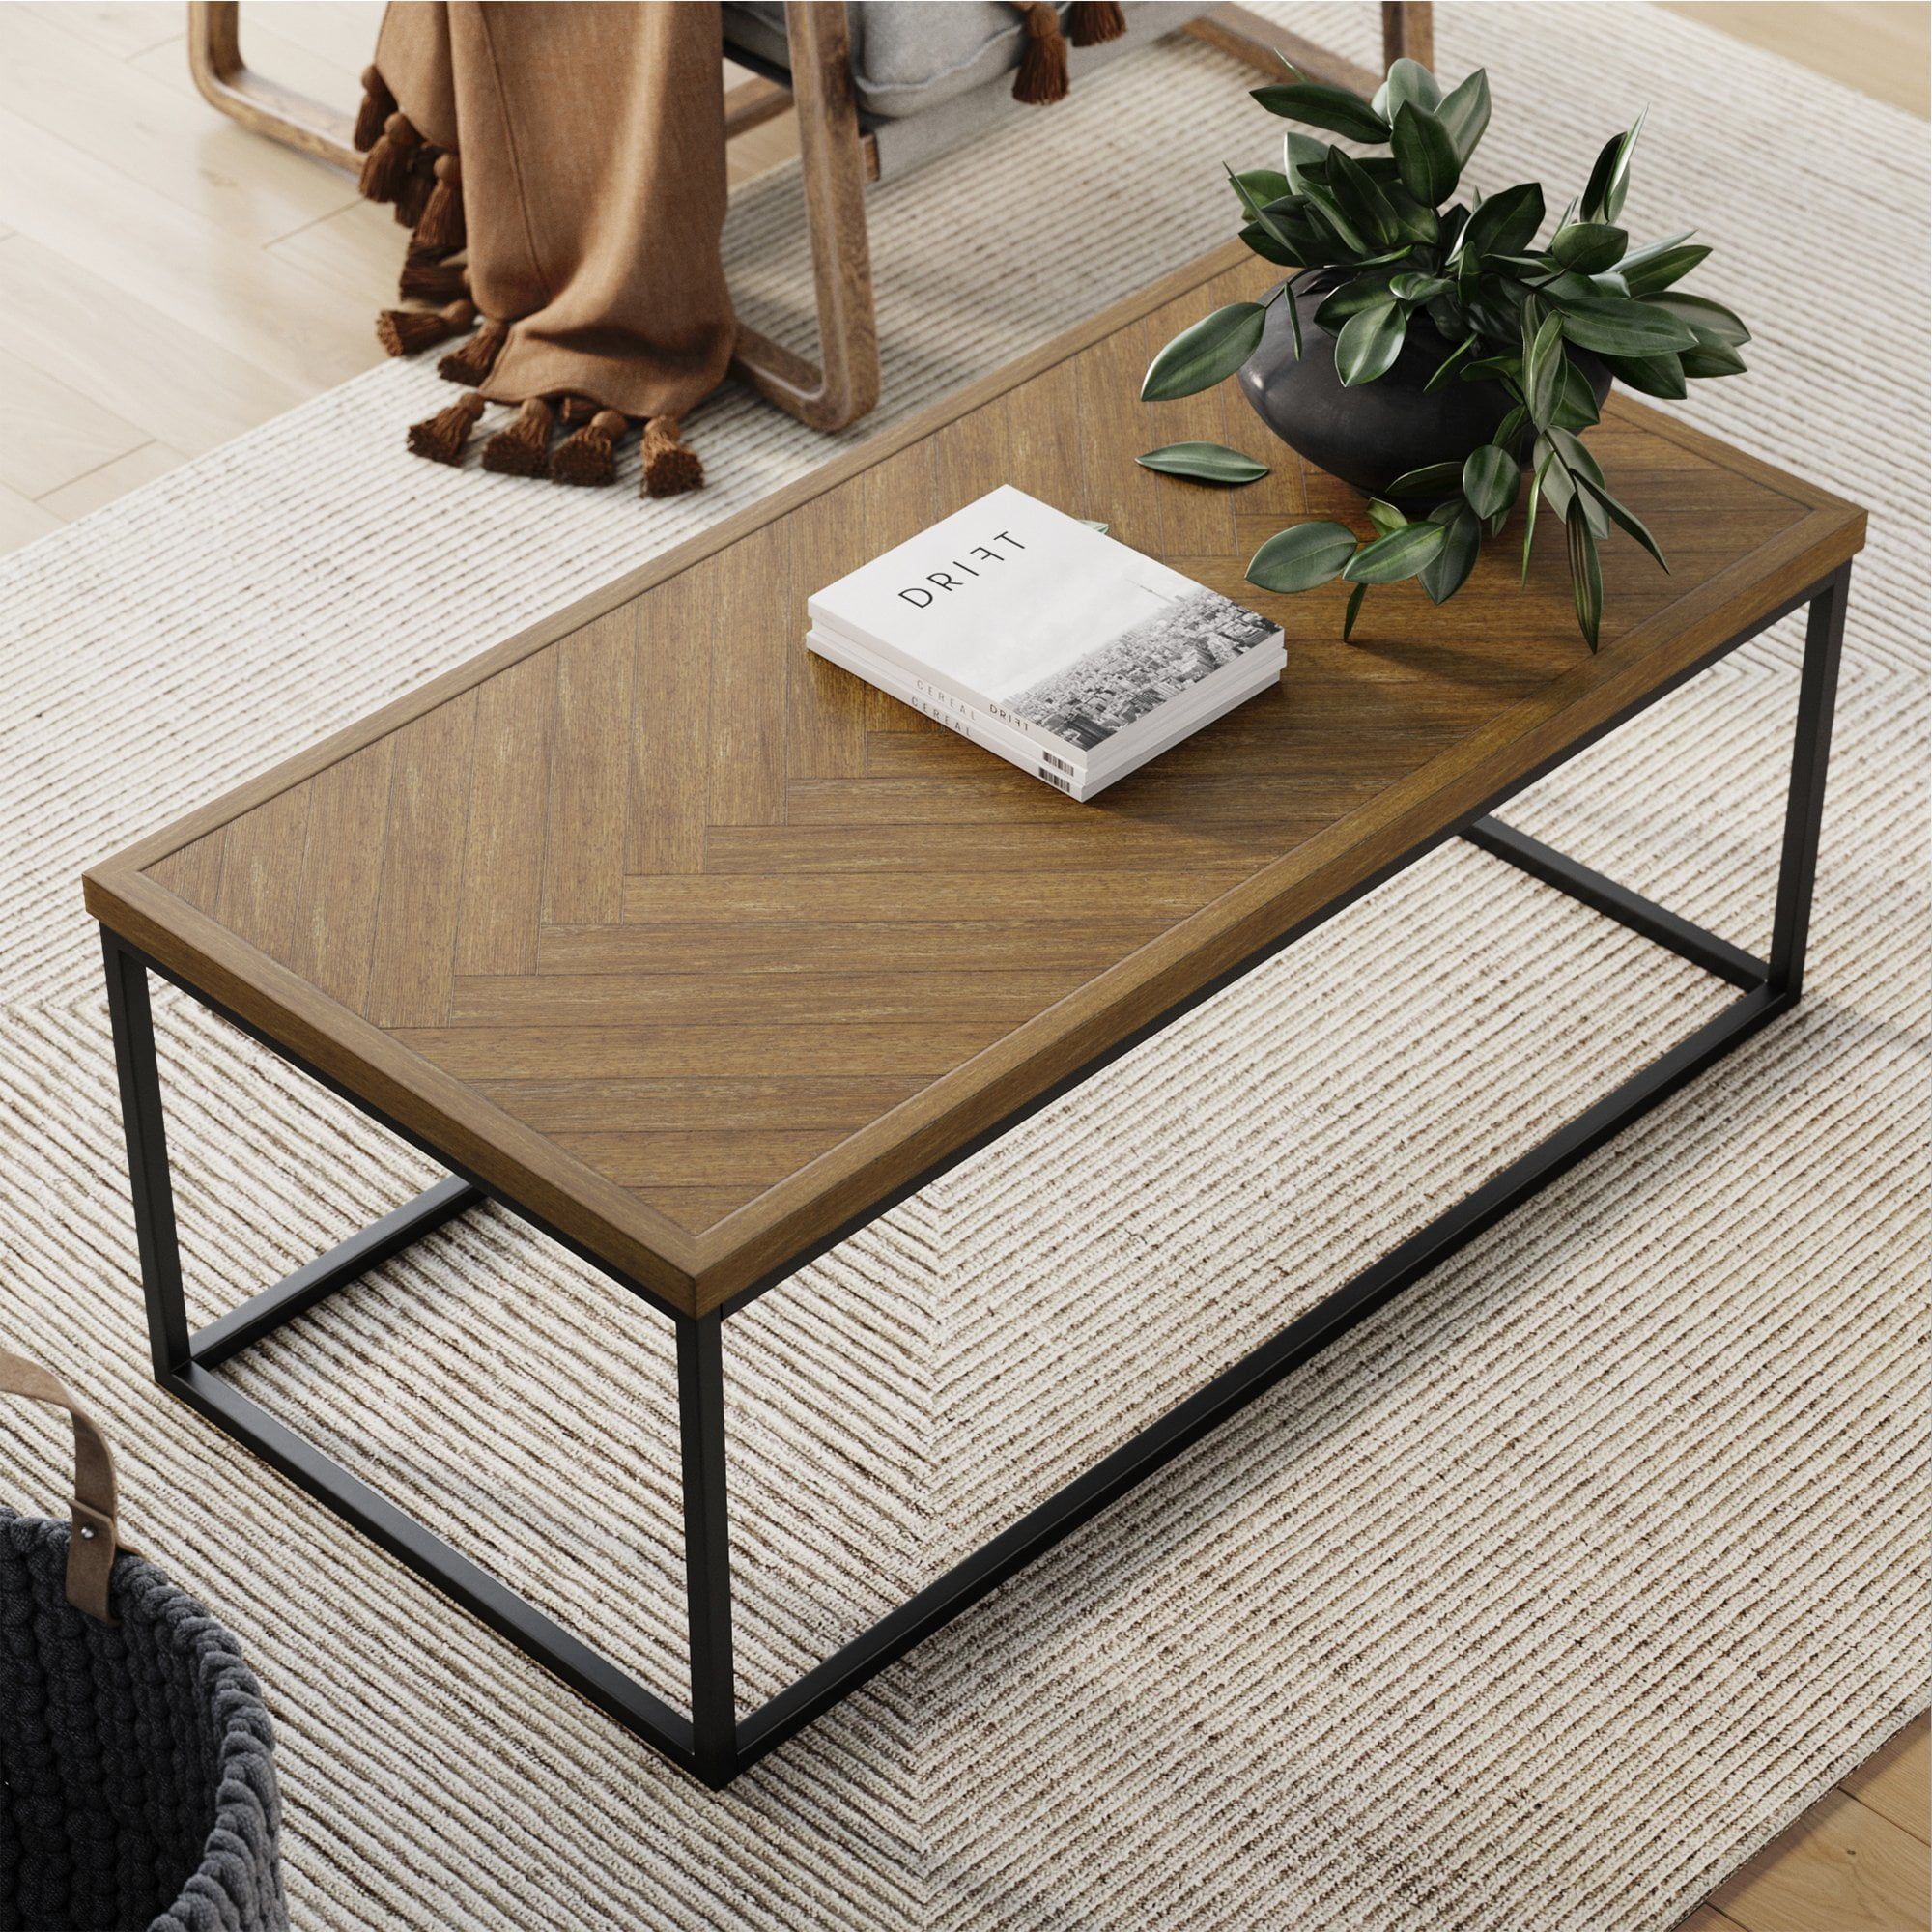 Modern Industrial Coffee Table Wood / Ofm Industrial Modern Wood Top Within Modern Wooden X Design Coffee Tables (View 18 of 20)